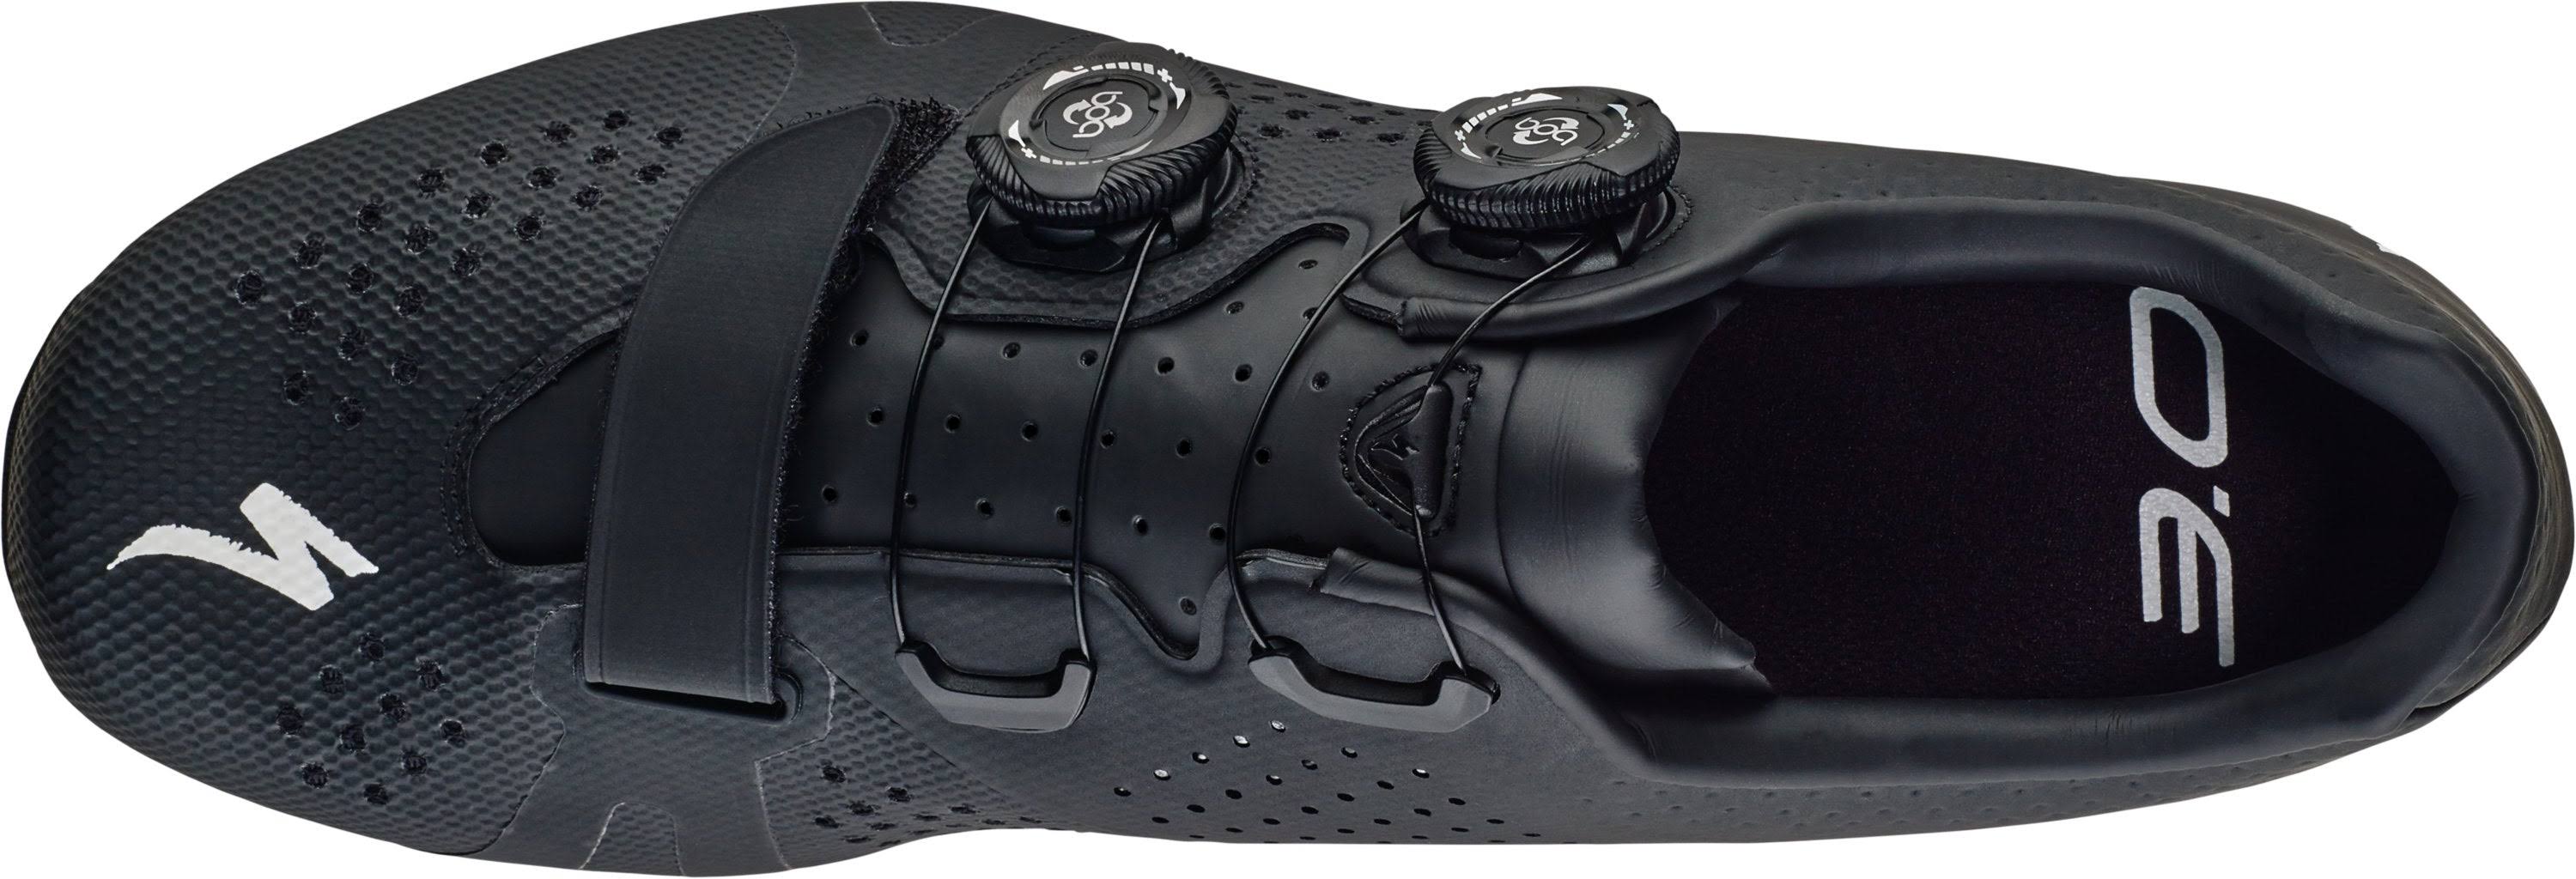 Torch 2.0 Road Shoes Specialized Black 43